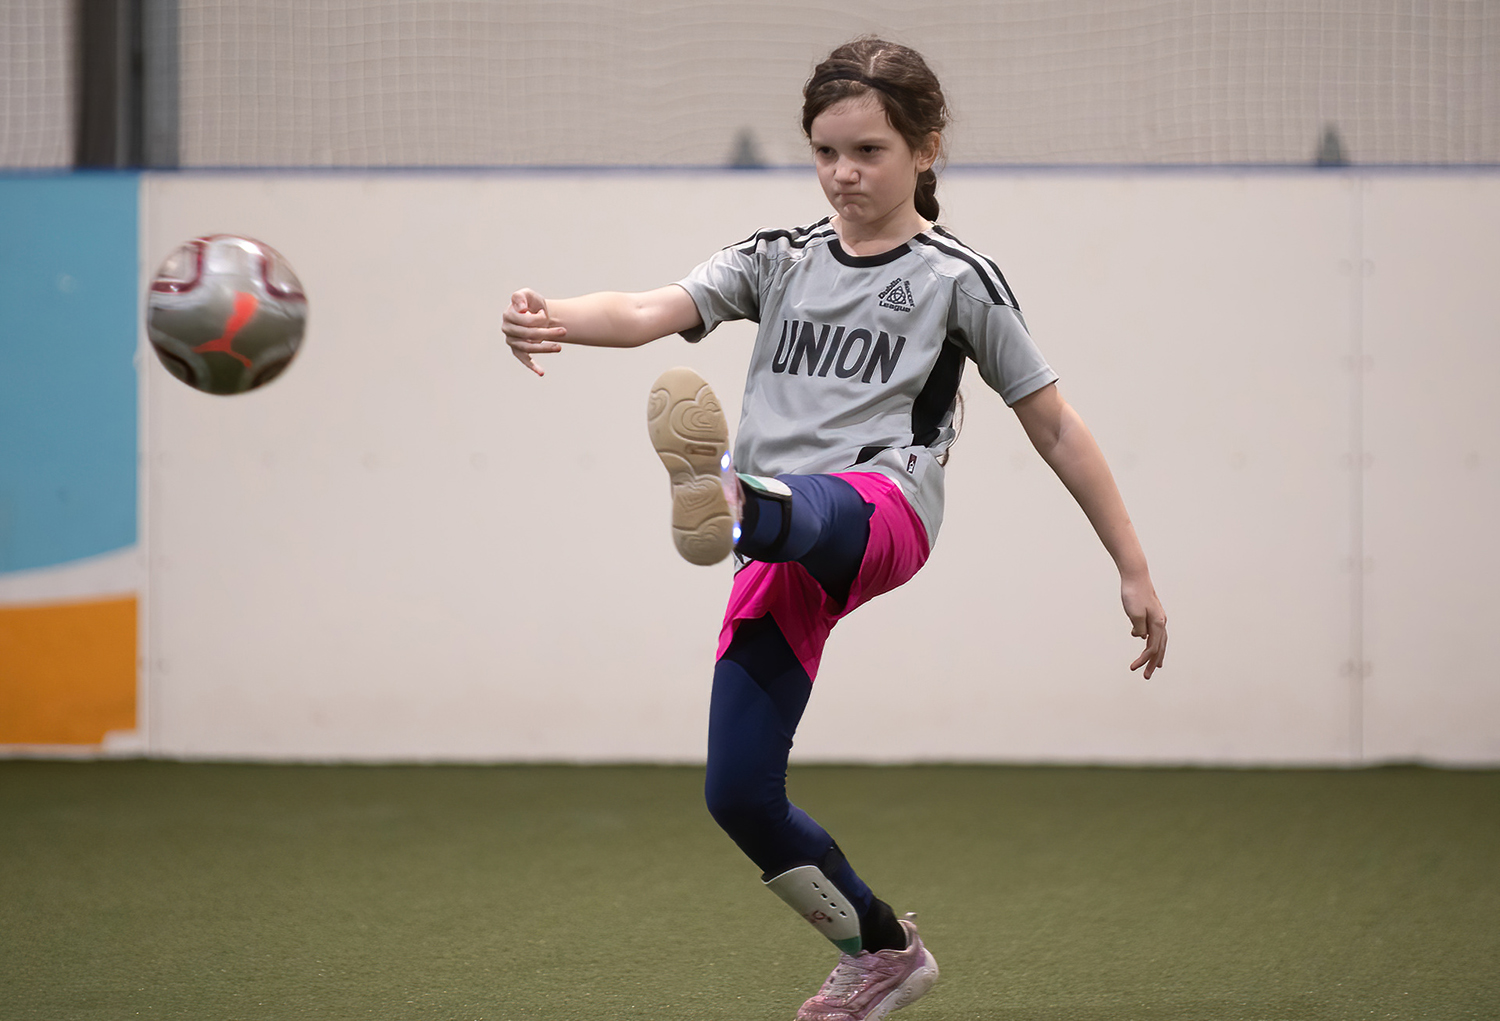 young lady in a gray jersey punts the soccer ball